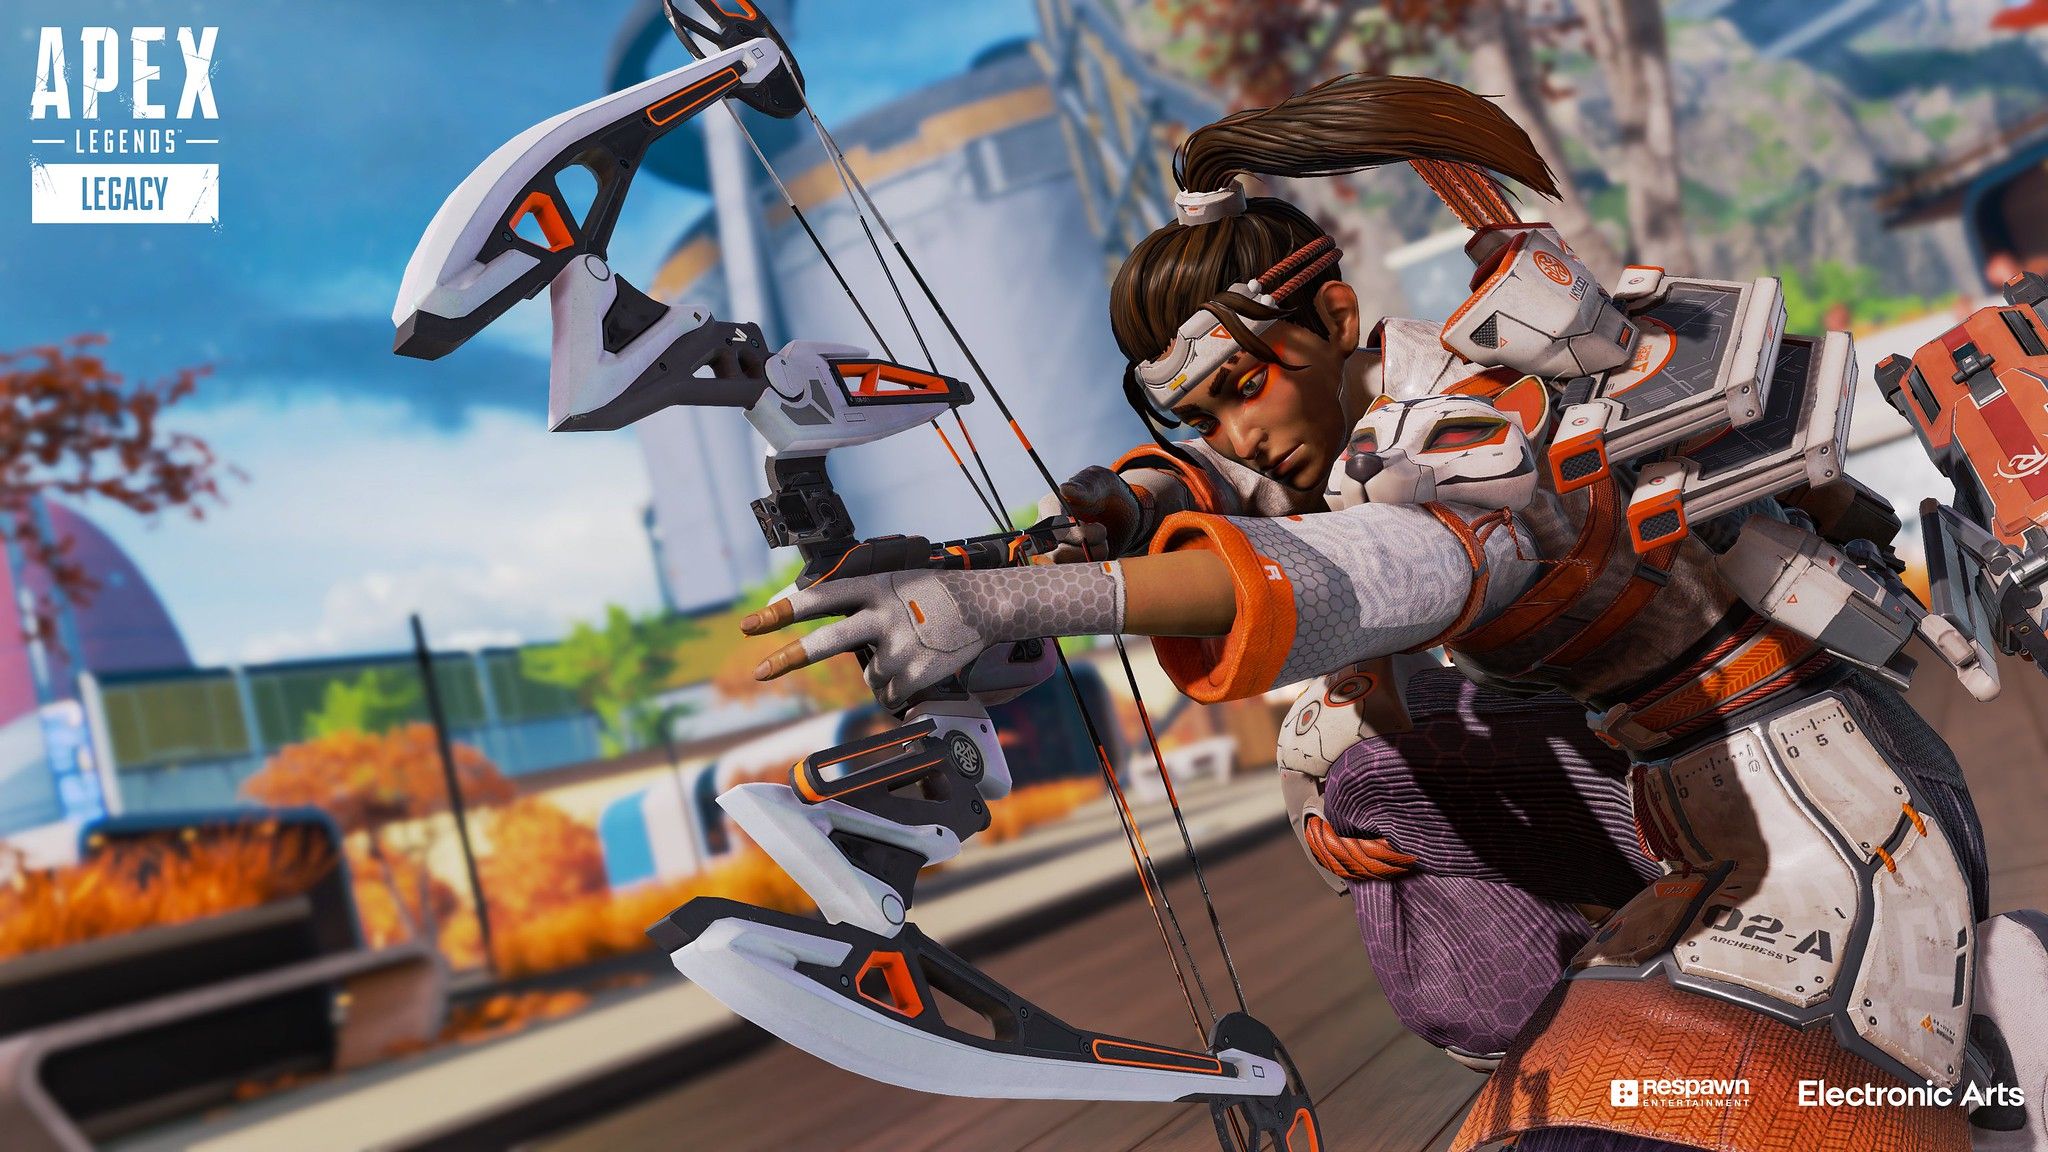 Apex Legends Season 9: A look at 3v3 Arena mode, the highflying Valkyrie, and more